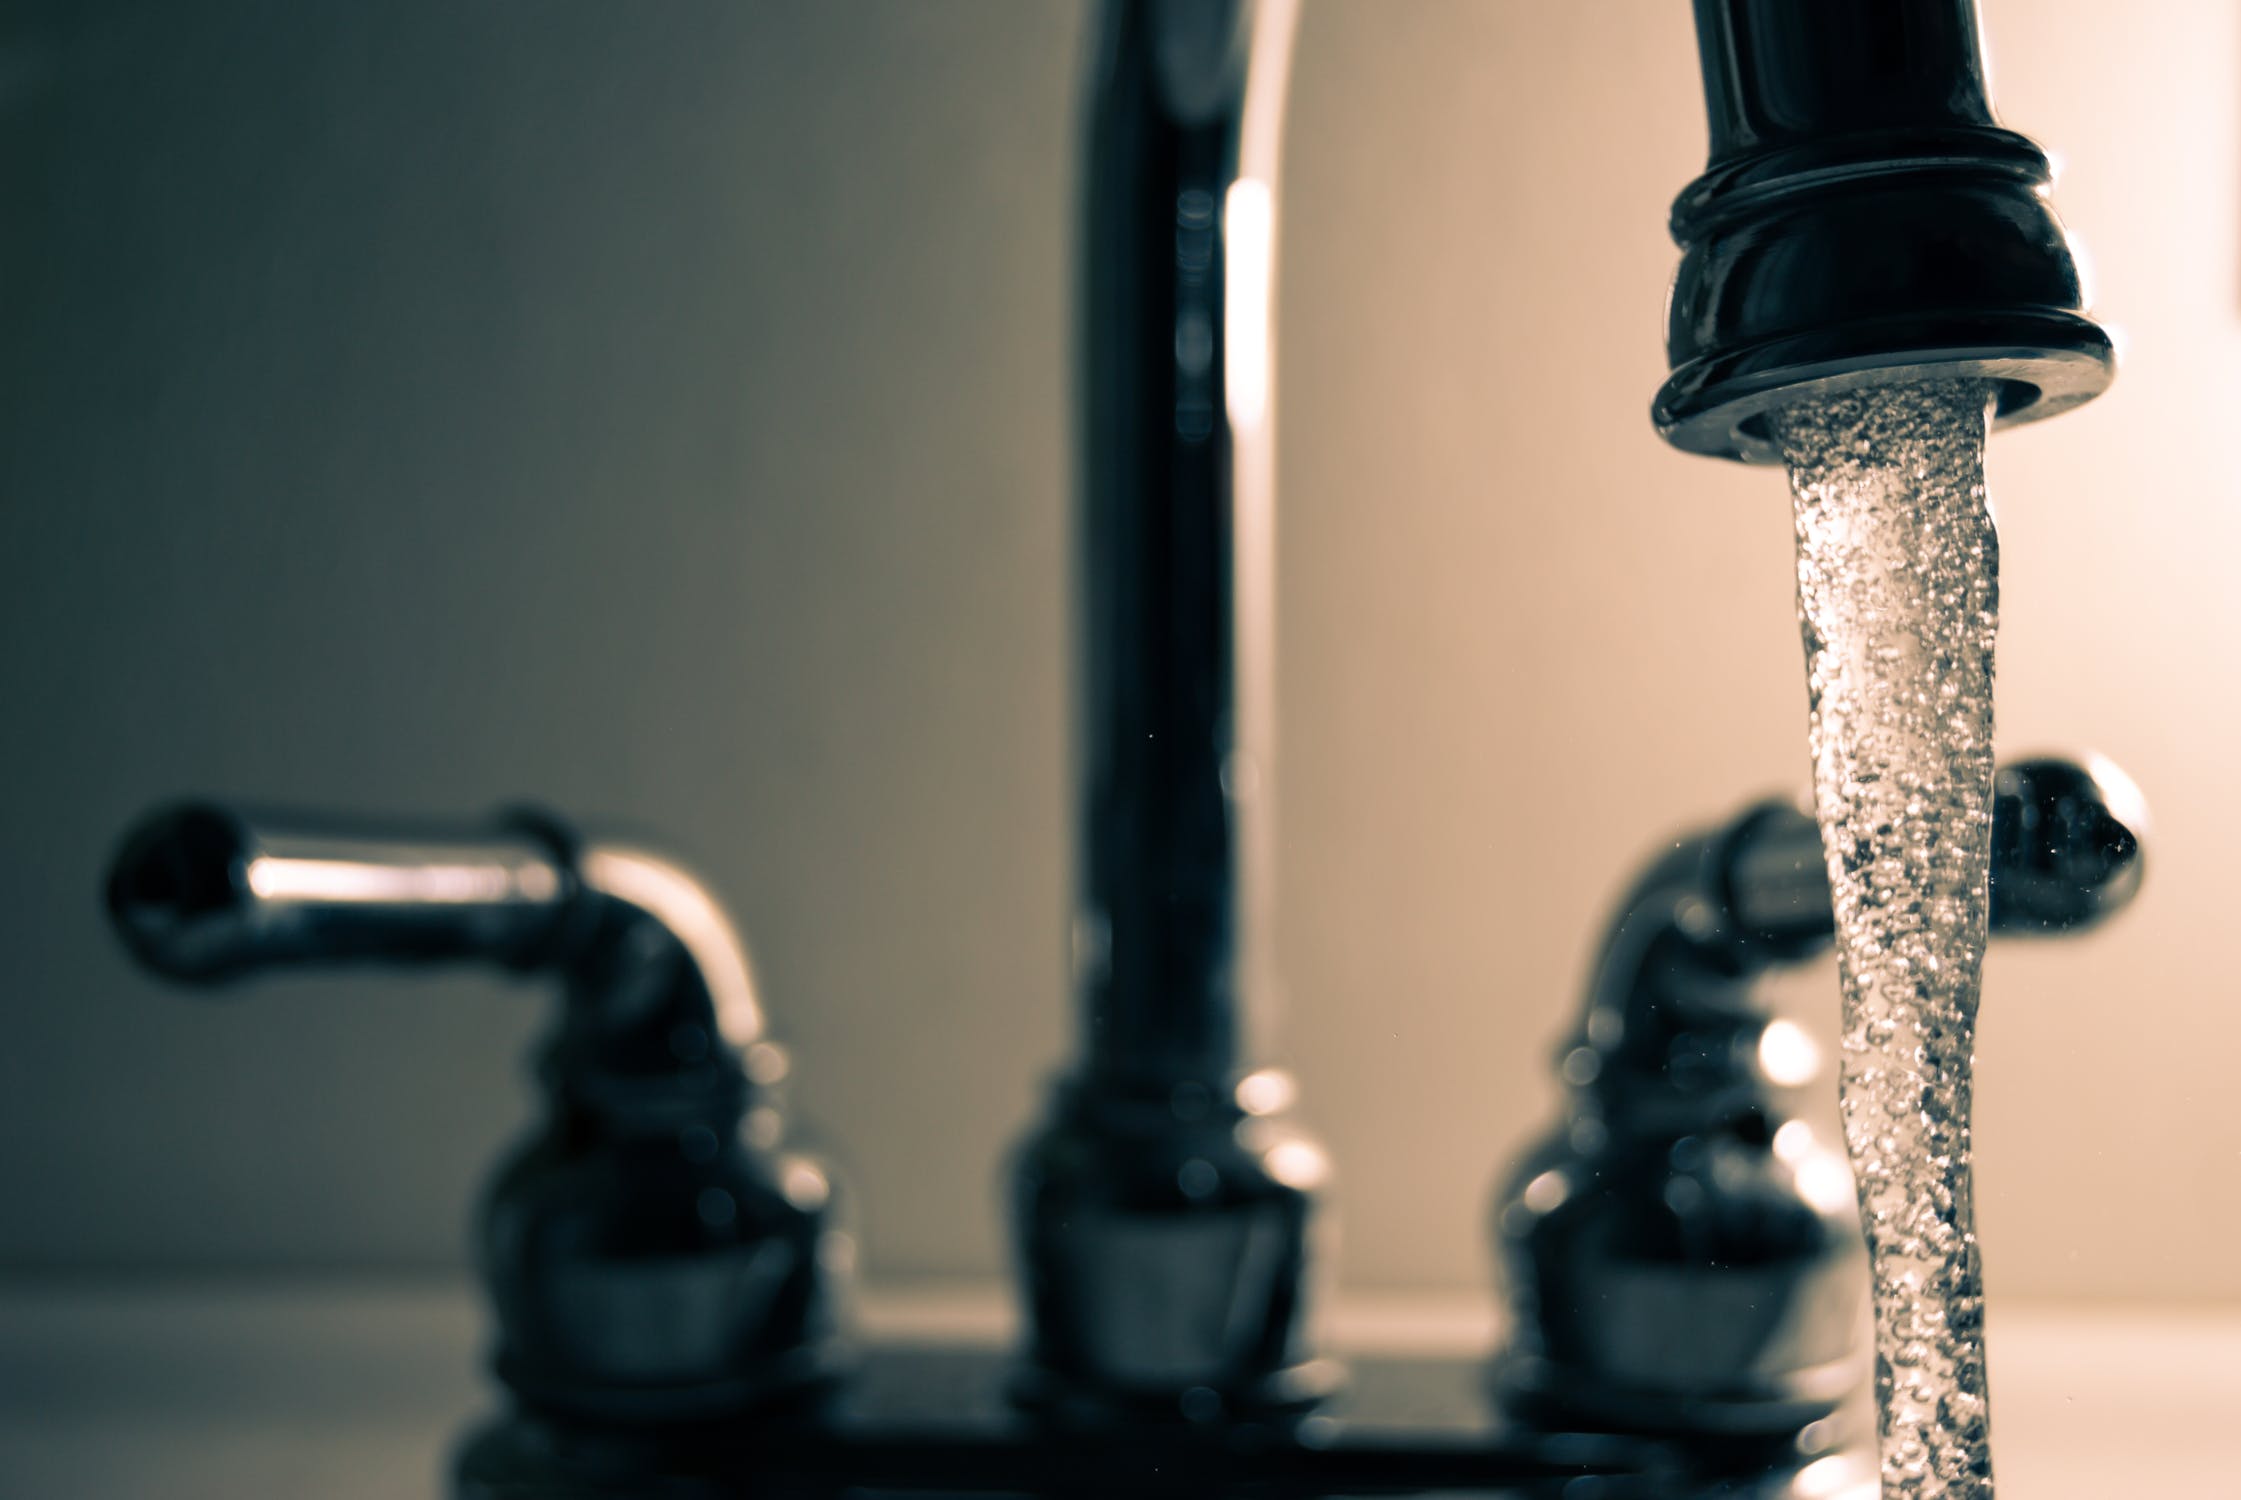 Don't let leaking pipes cause damage to your property. Visit our website for expert guidance, products, and services to fix and prevent leaks. Trust us to keep your plumbing in top shape.